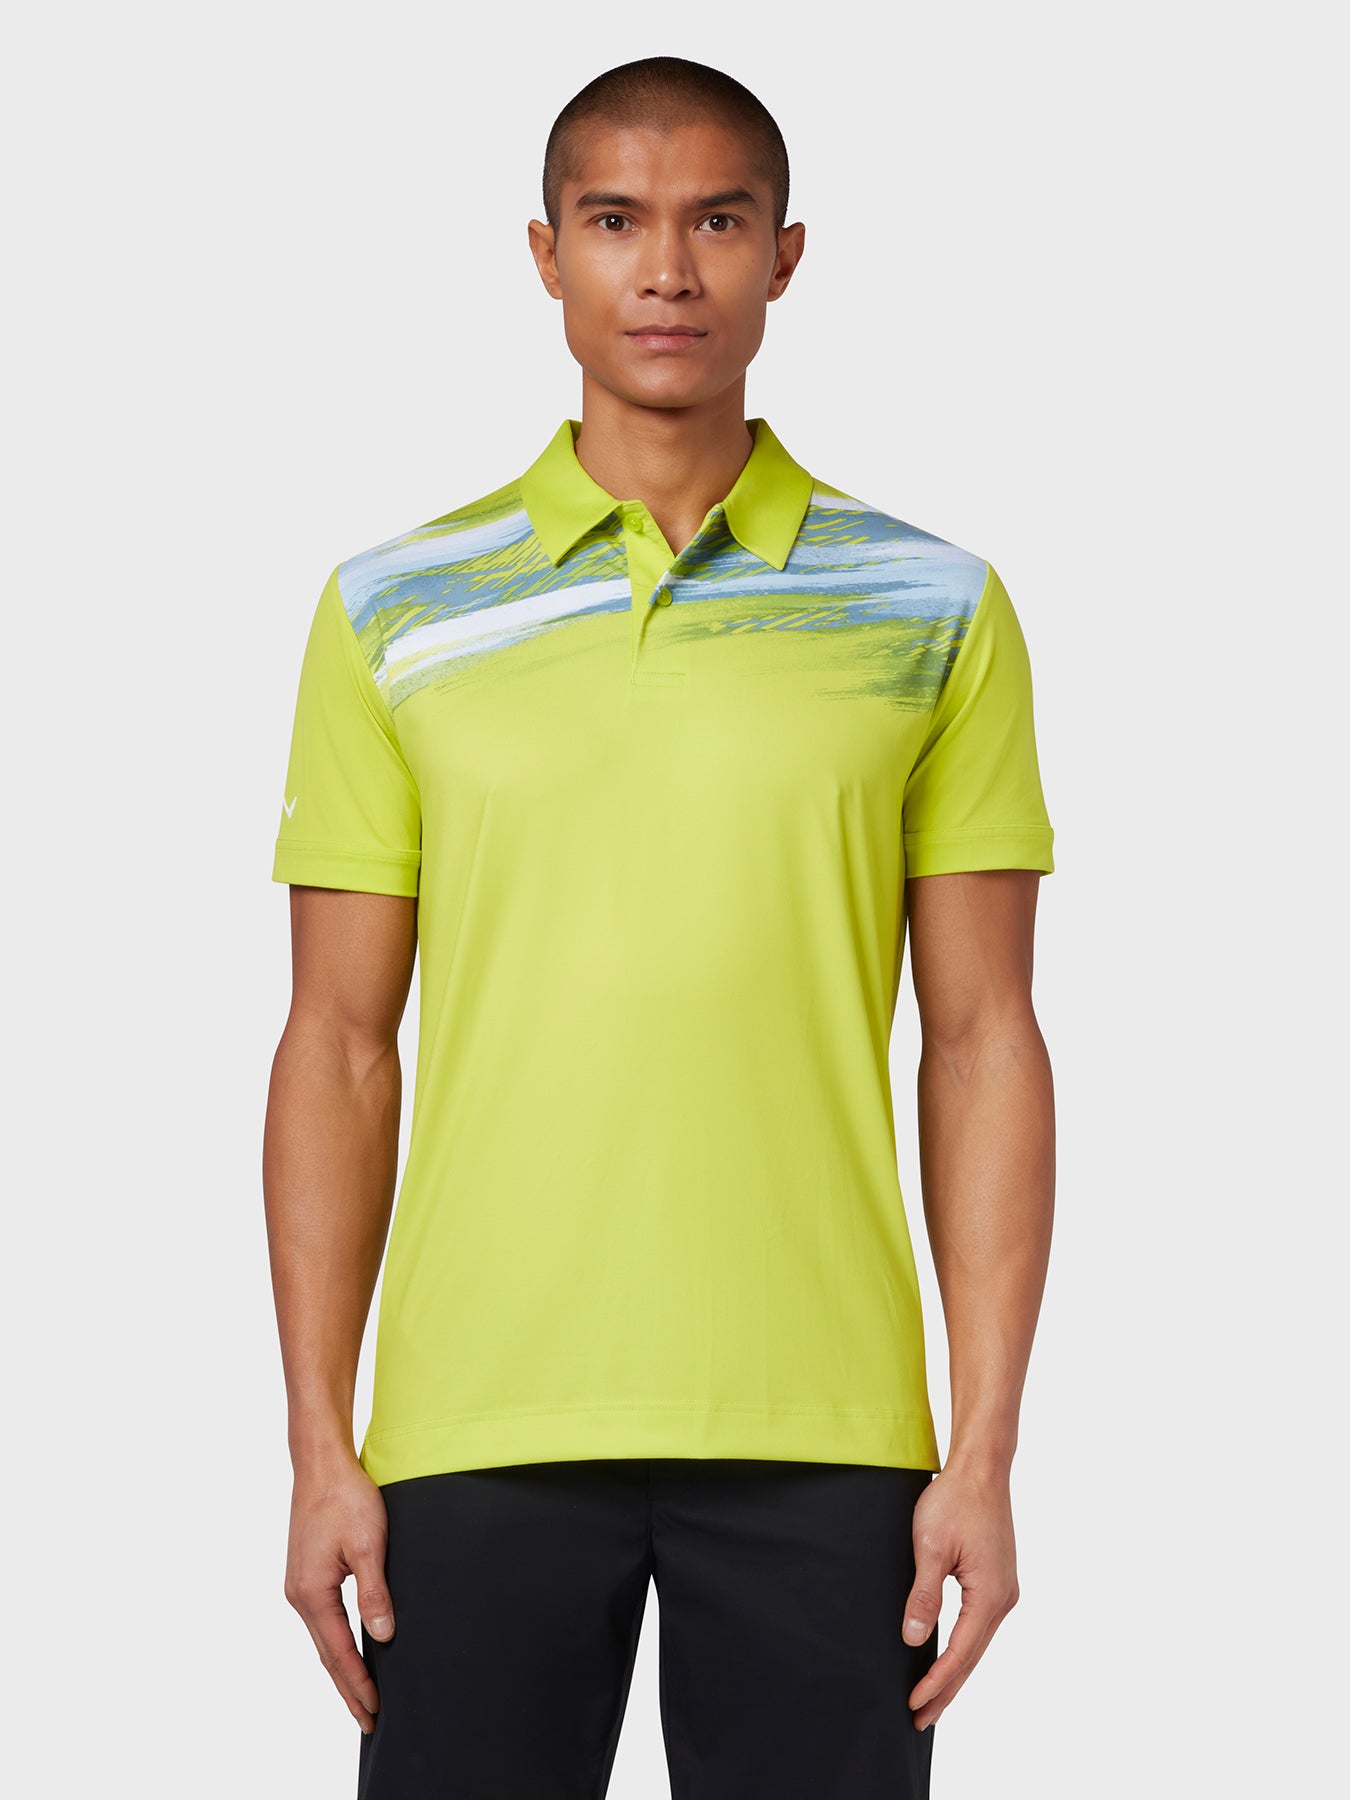 View X Series Active Textured Print Polo In Lime Punch Lime Punch XXL information